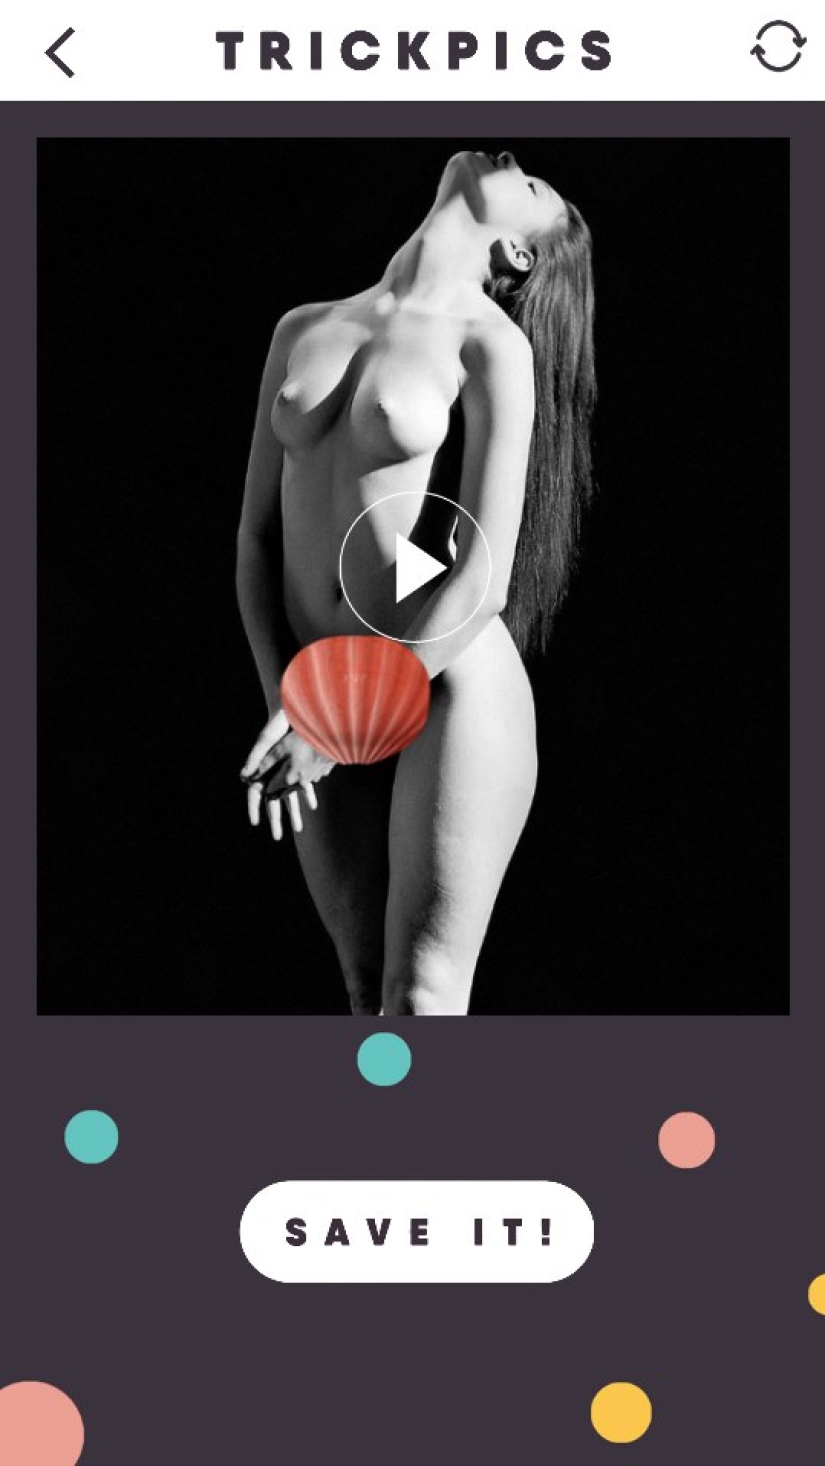 PornHub has released an application with stickers for intimate parts of the body